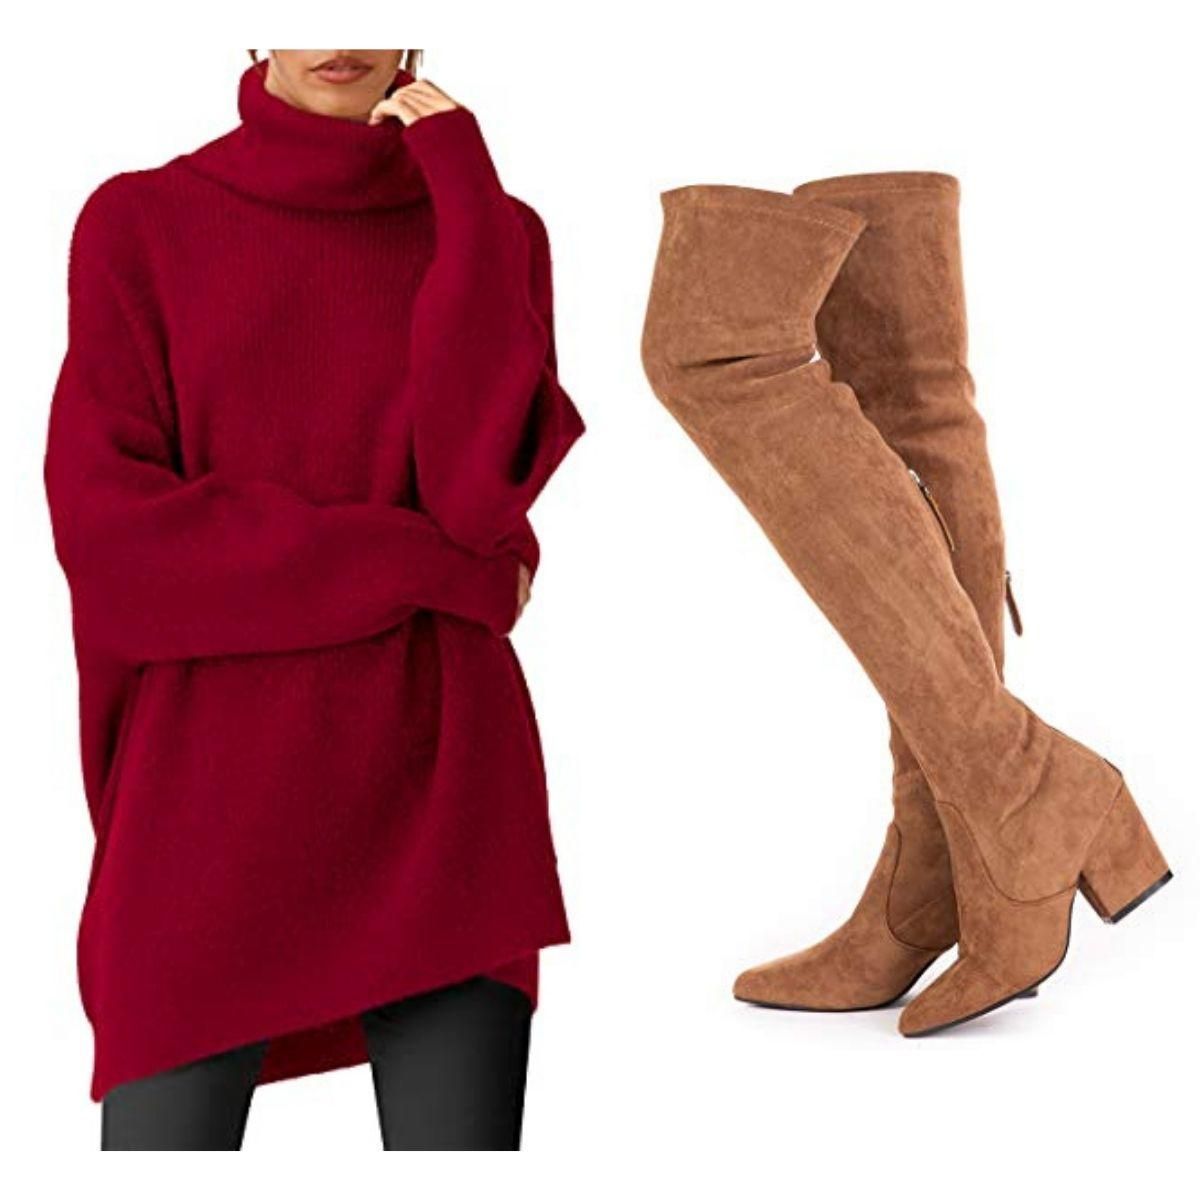 Fall Fashion Favorites Our Readers Are Loving Right Now